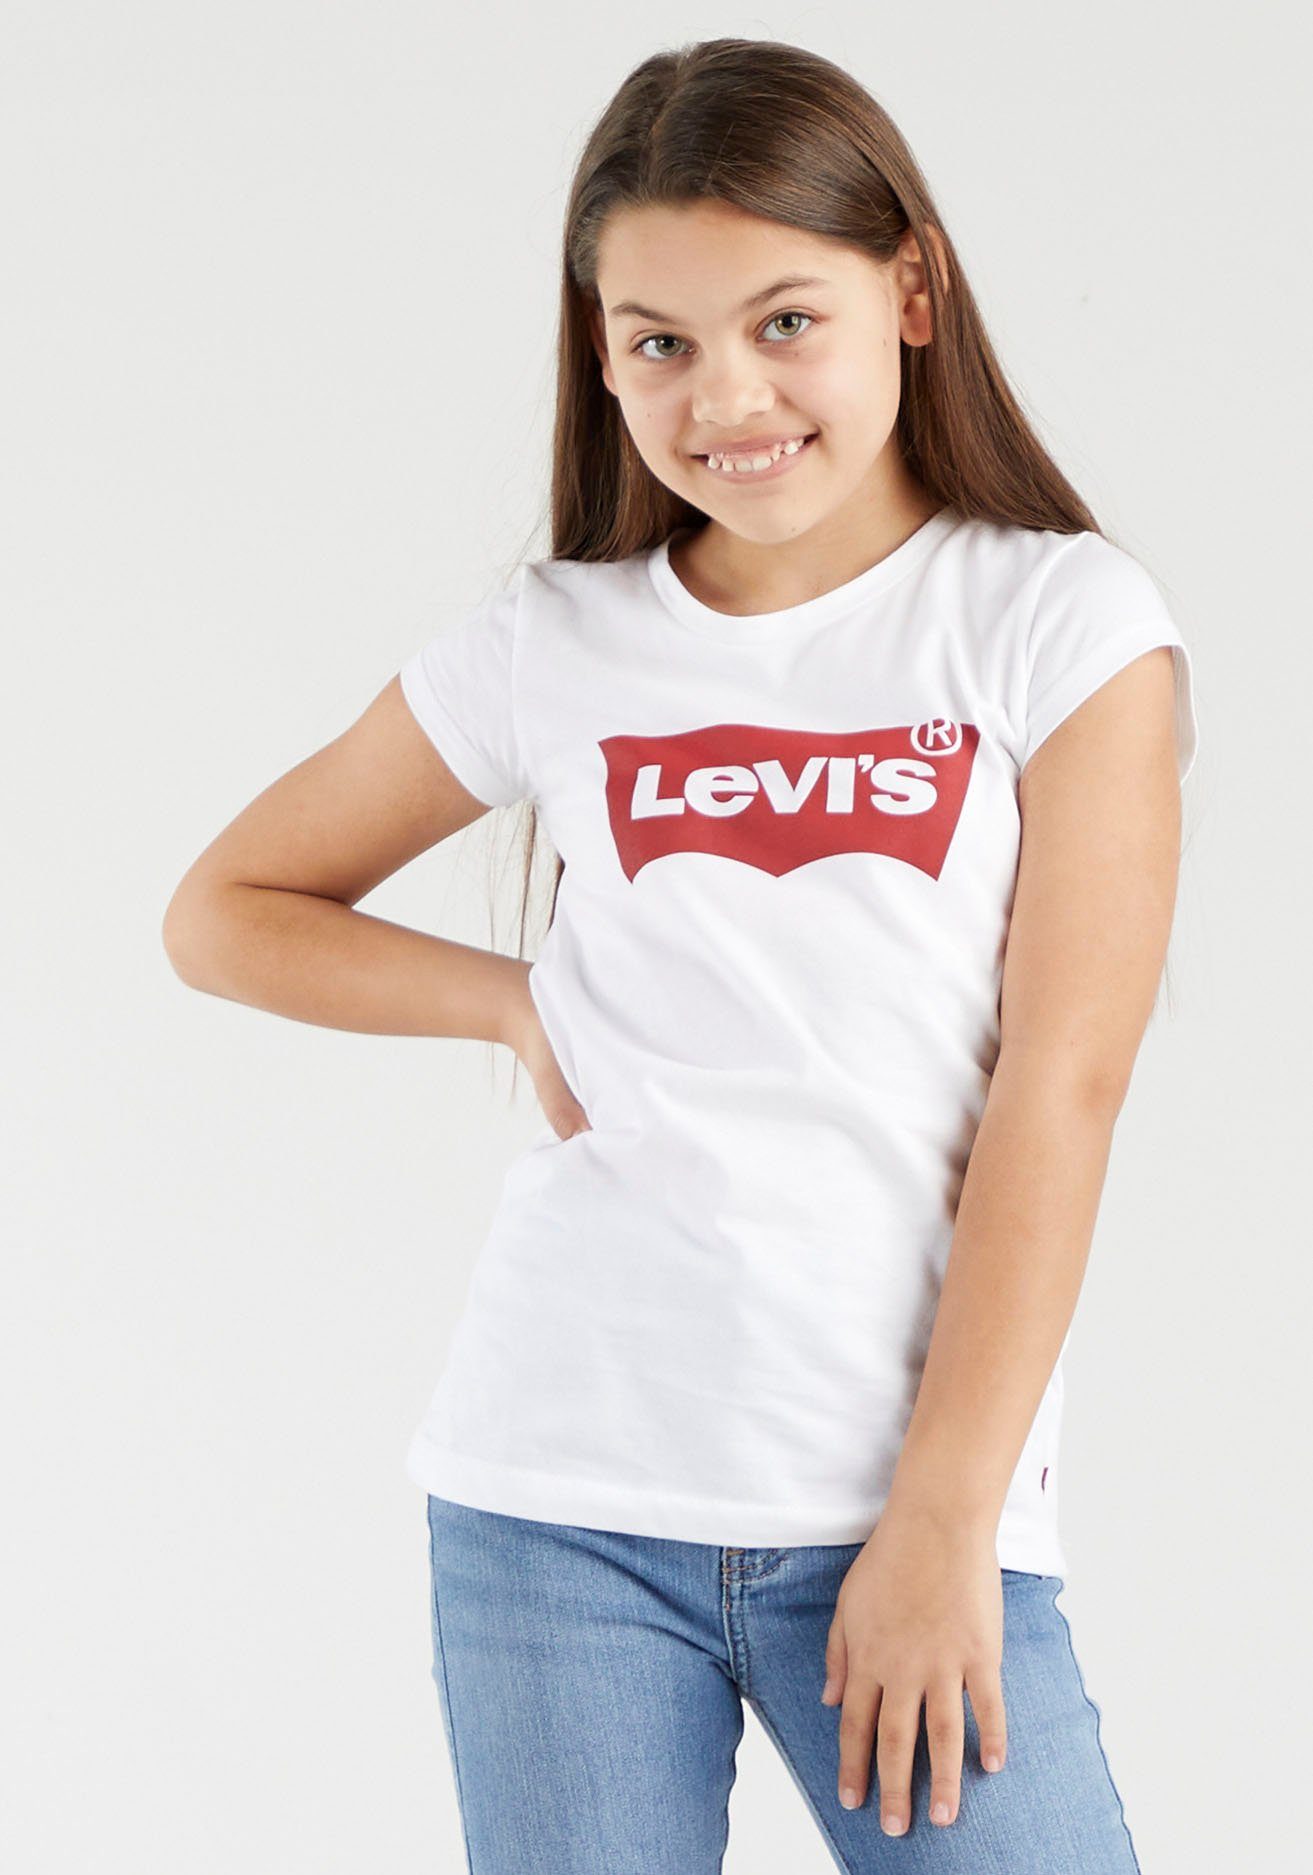 Levi's® for BATWING Kids GIRLS T-Shirt TEE white/red